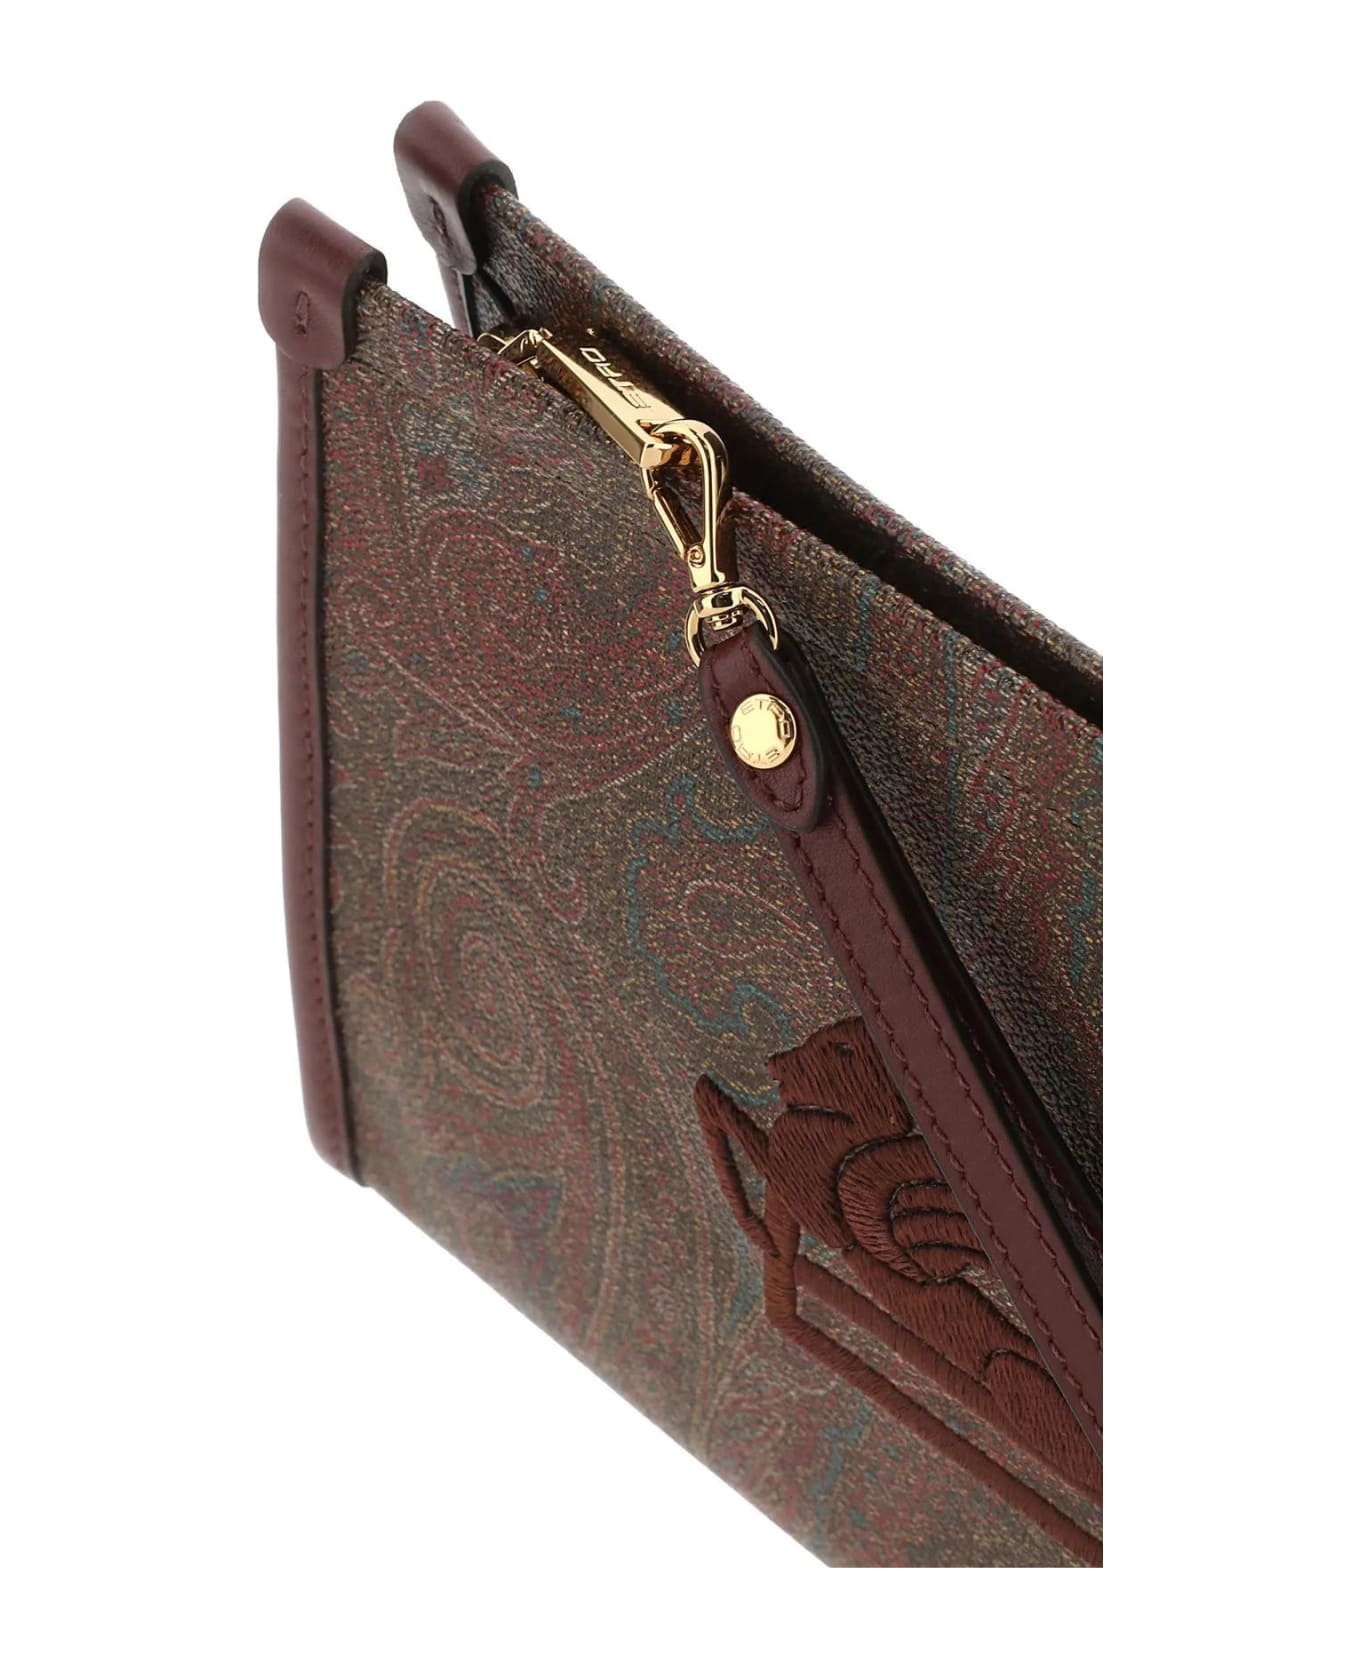 Etro Printed Fabric Pouch - Red